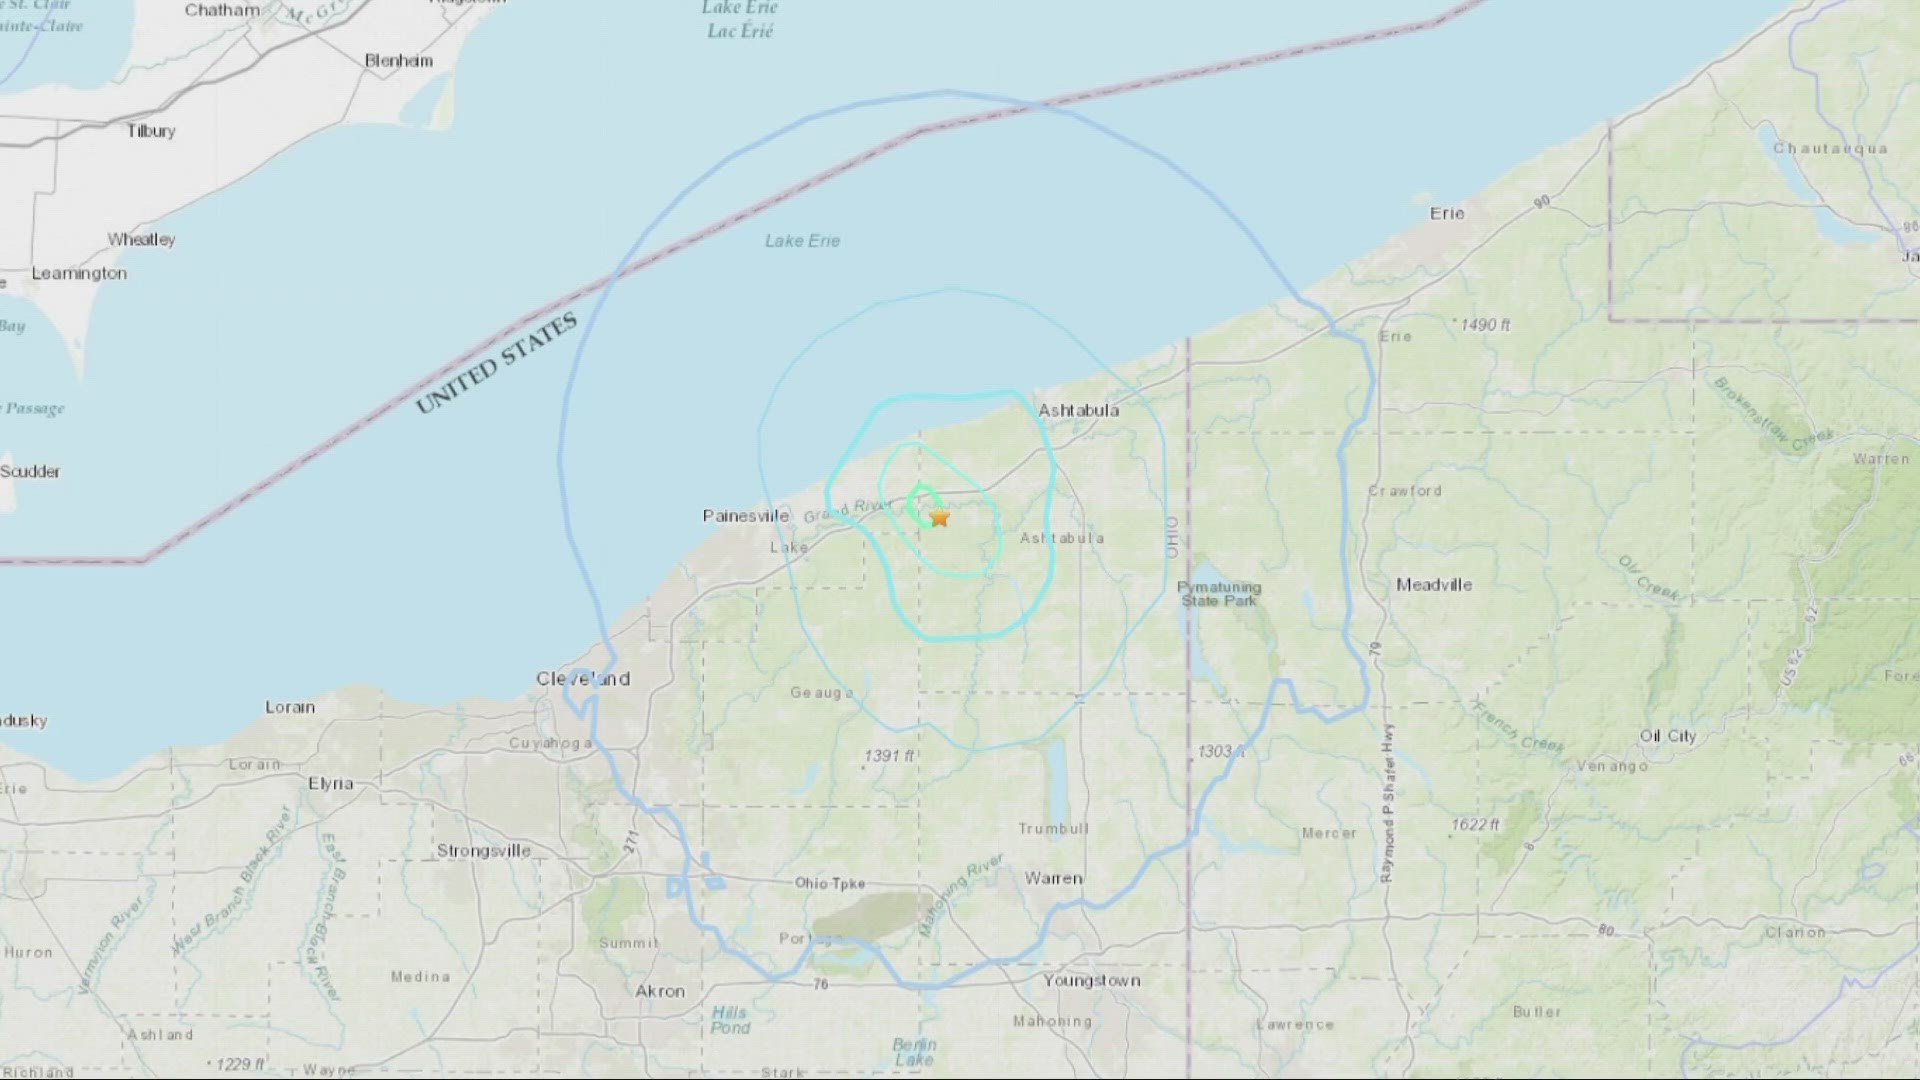 The United States Geological Survey (USGS) has confirmed a 4.0 magnitude earthquake in Madison Sunday evening.